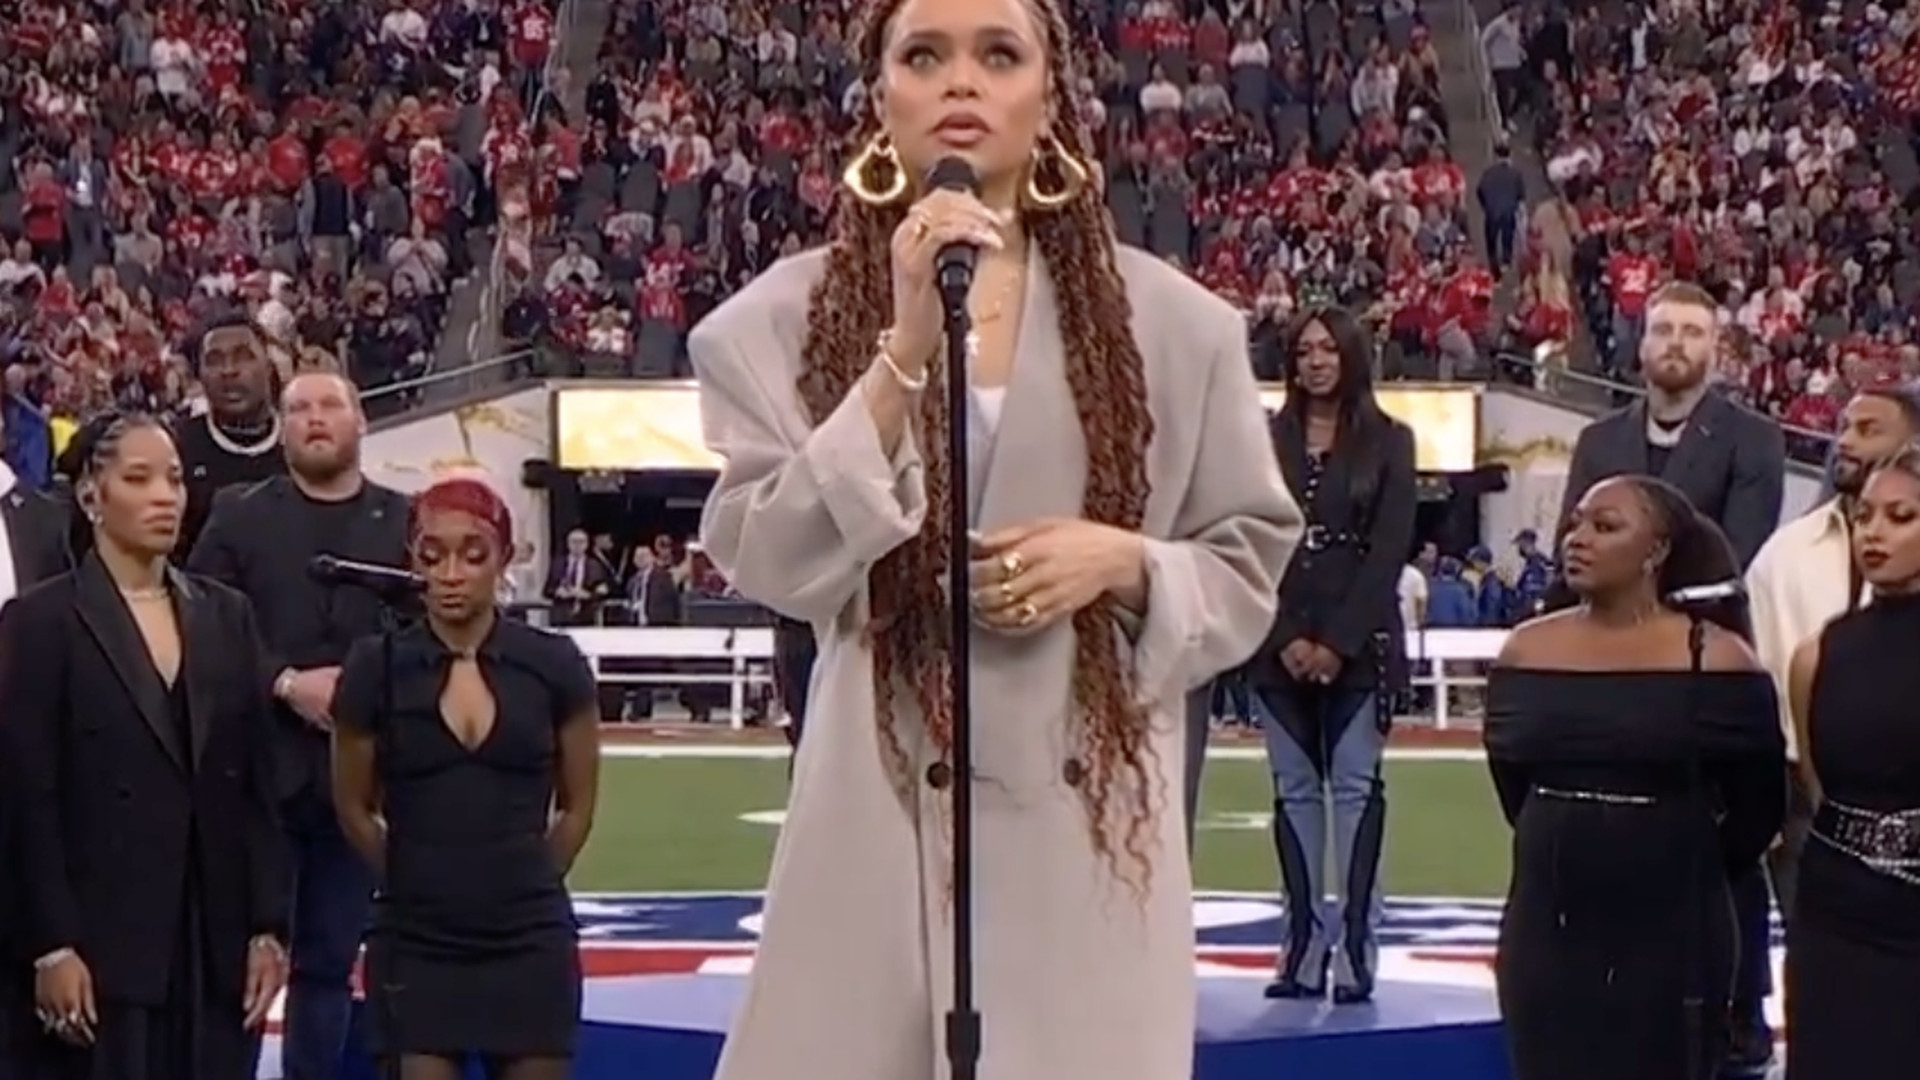 watch andra day’s moving performance of ‘lift every voice and sing’ at super bowl